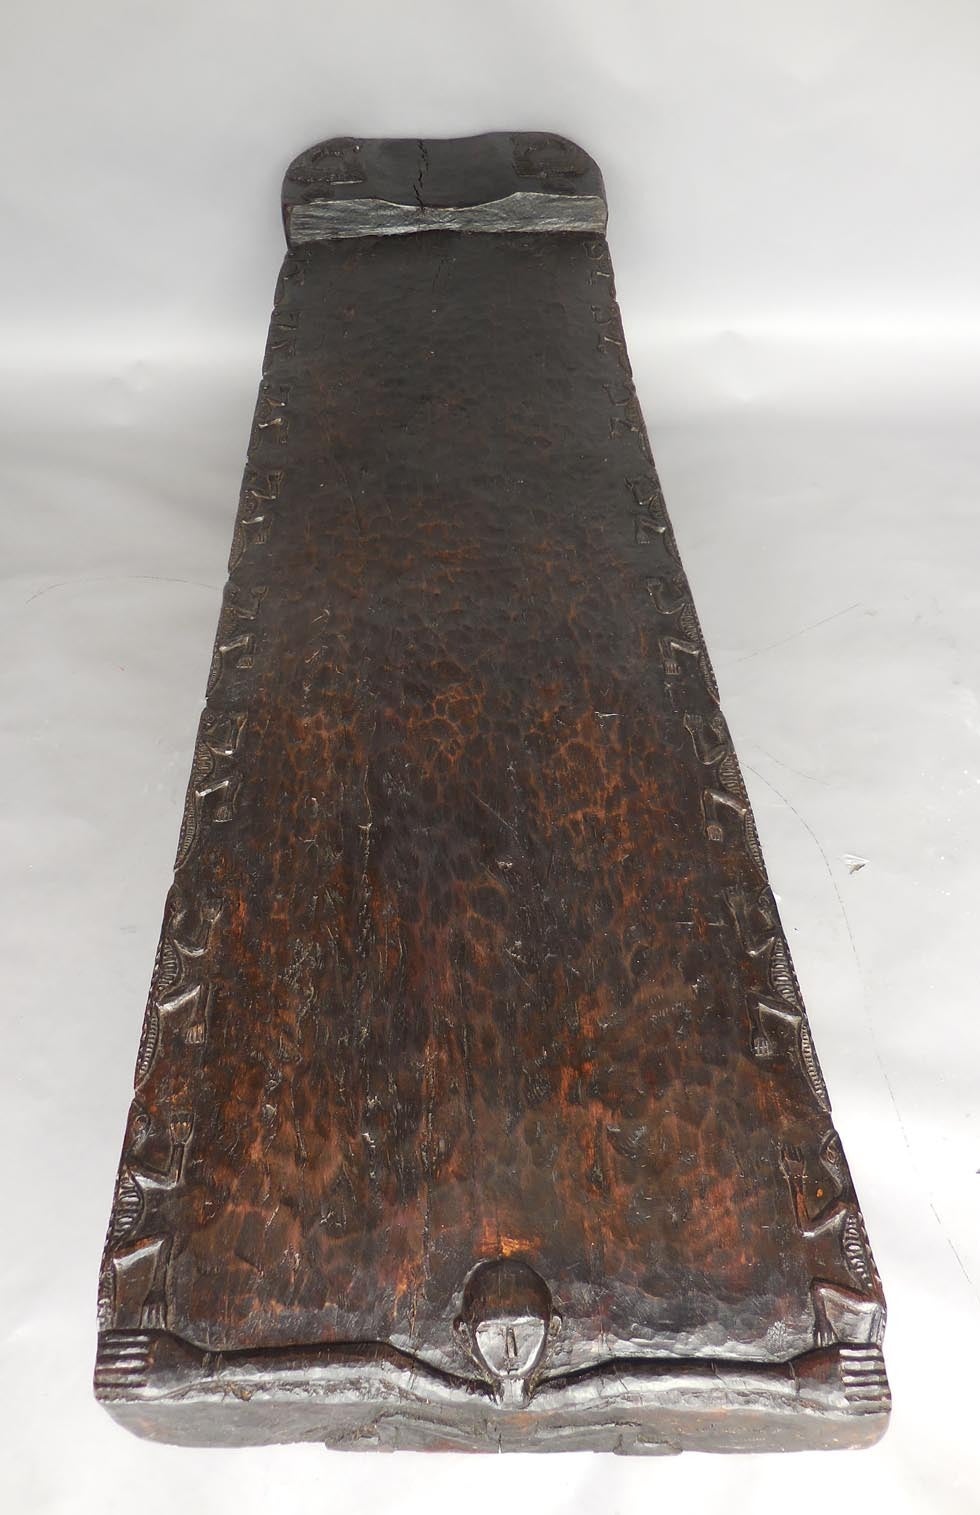 Antique carved bench/wooden bed from Timor Island. Carved lizards along edges and a monkey at the foot. Contemporary hand forged iron base. 
It measures 76.5x20x17H at the seat and 19.75 total height. Hand hewn and hand carved, dark patina.